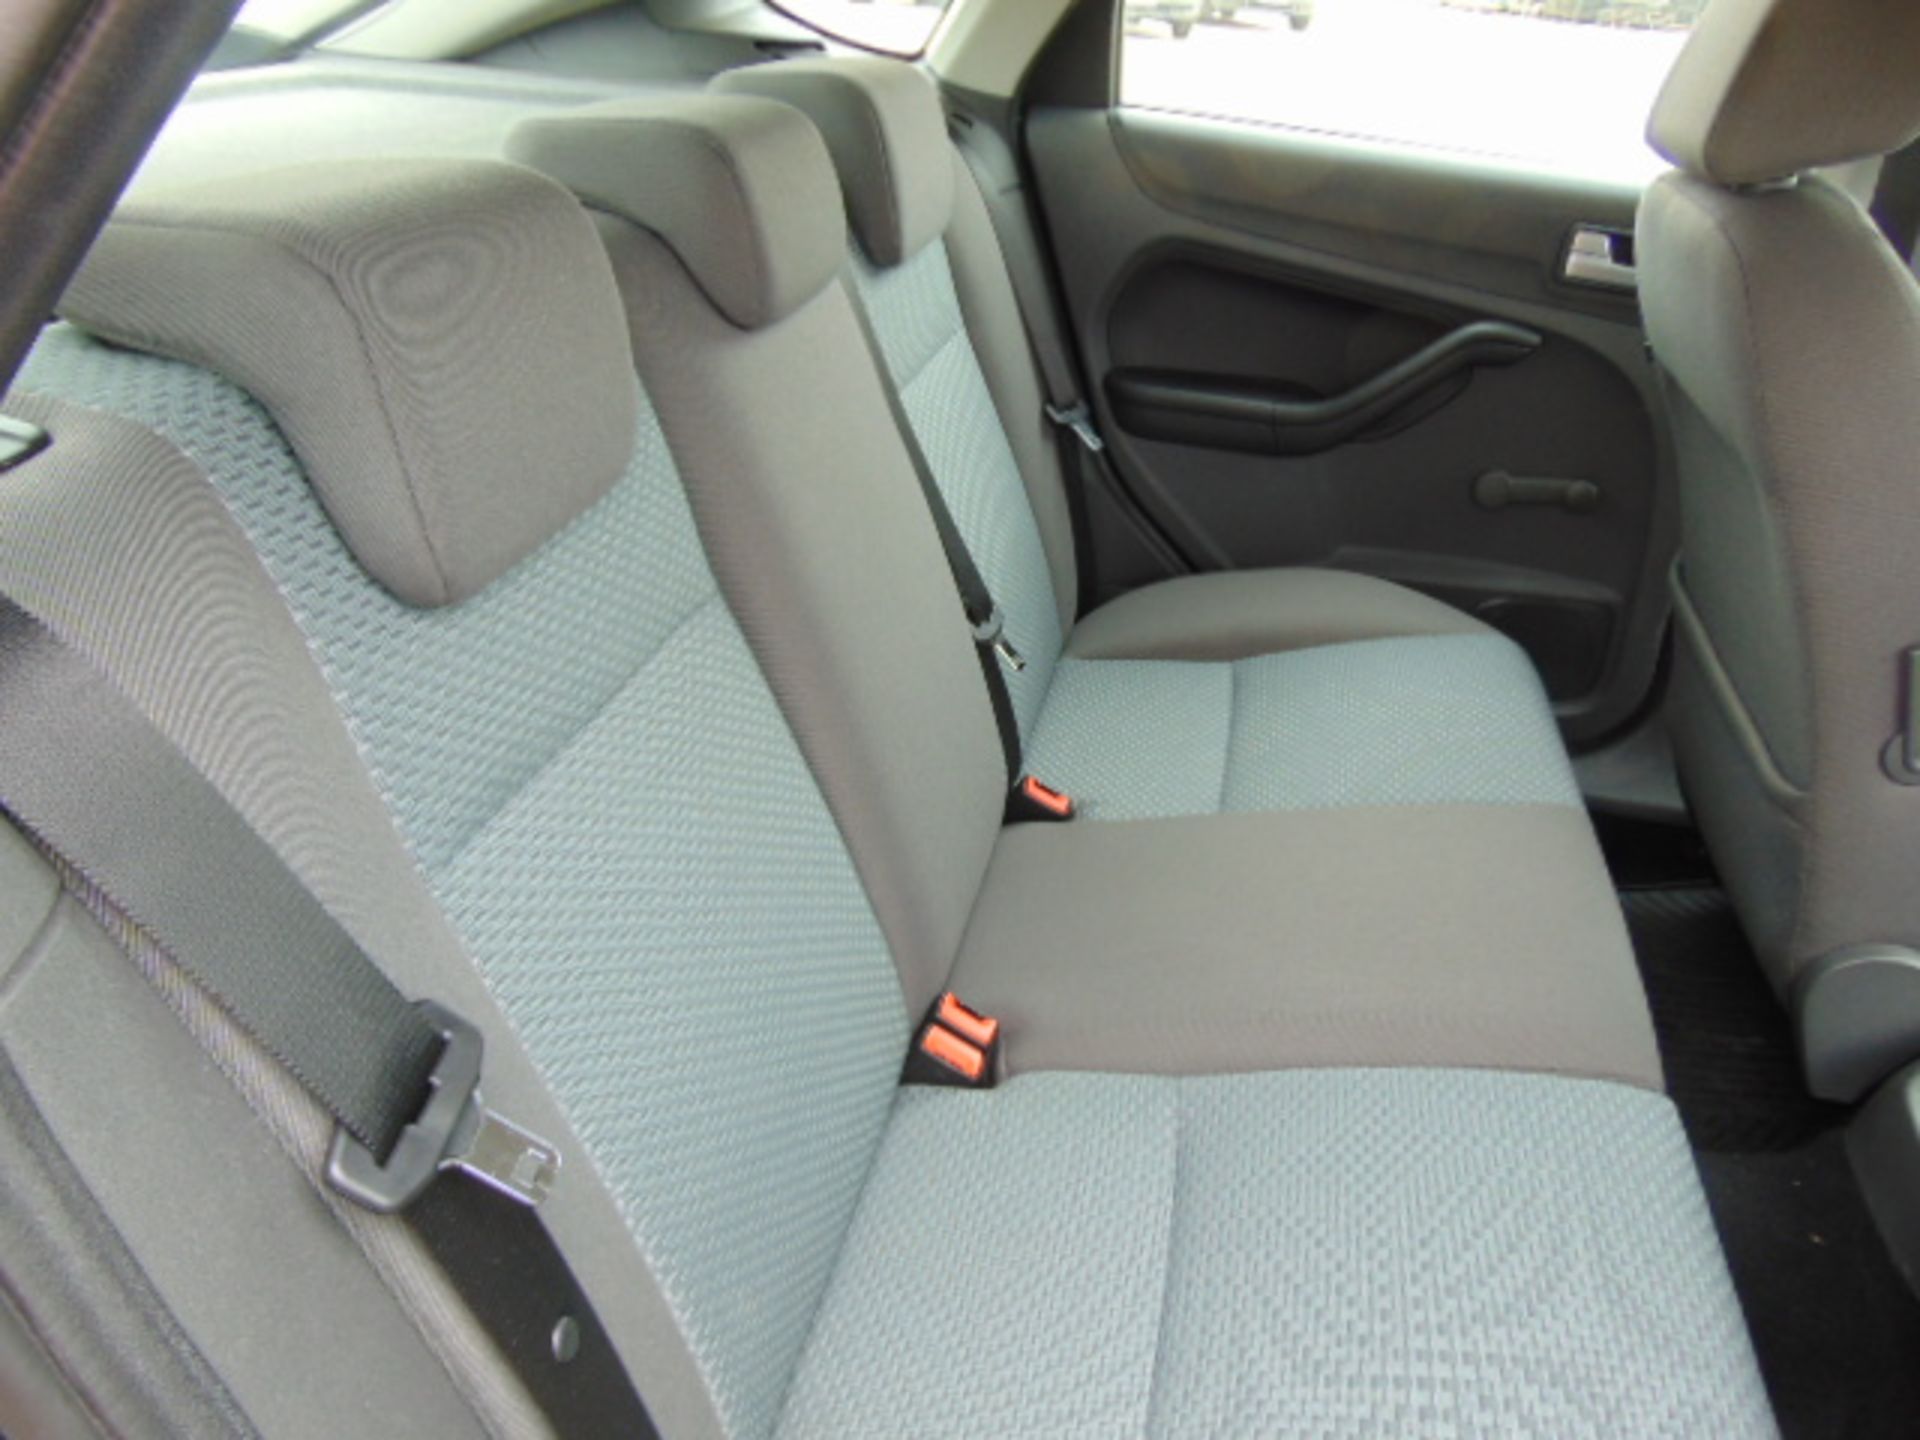 Ford Focus 1.8 TDCI Style Hatchback - Image 14 of 18